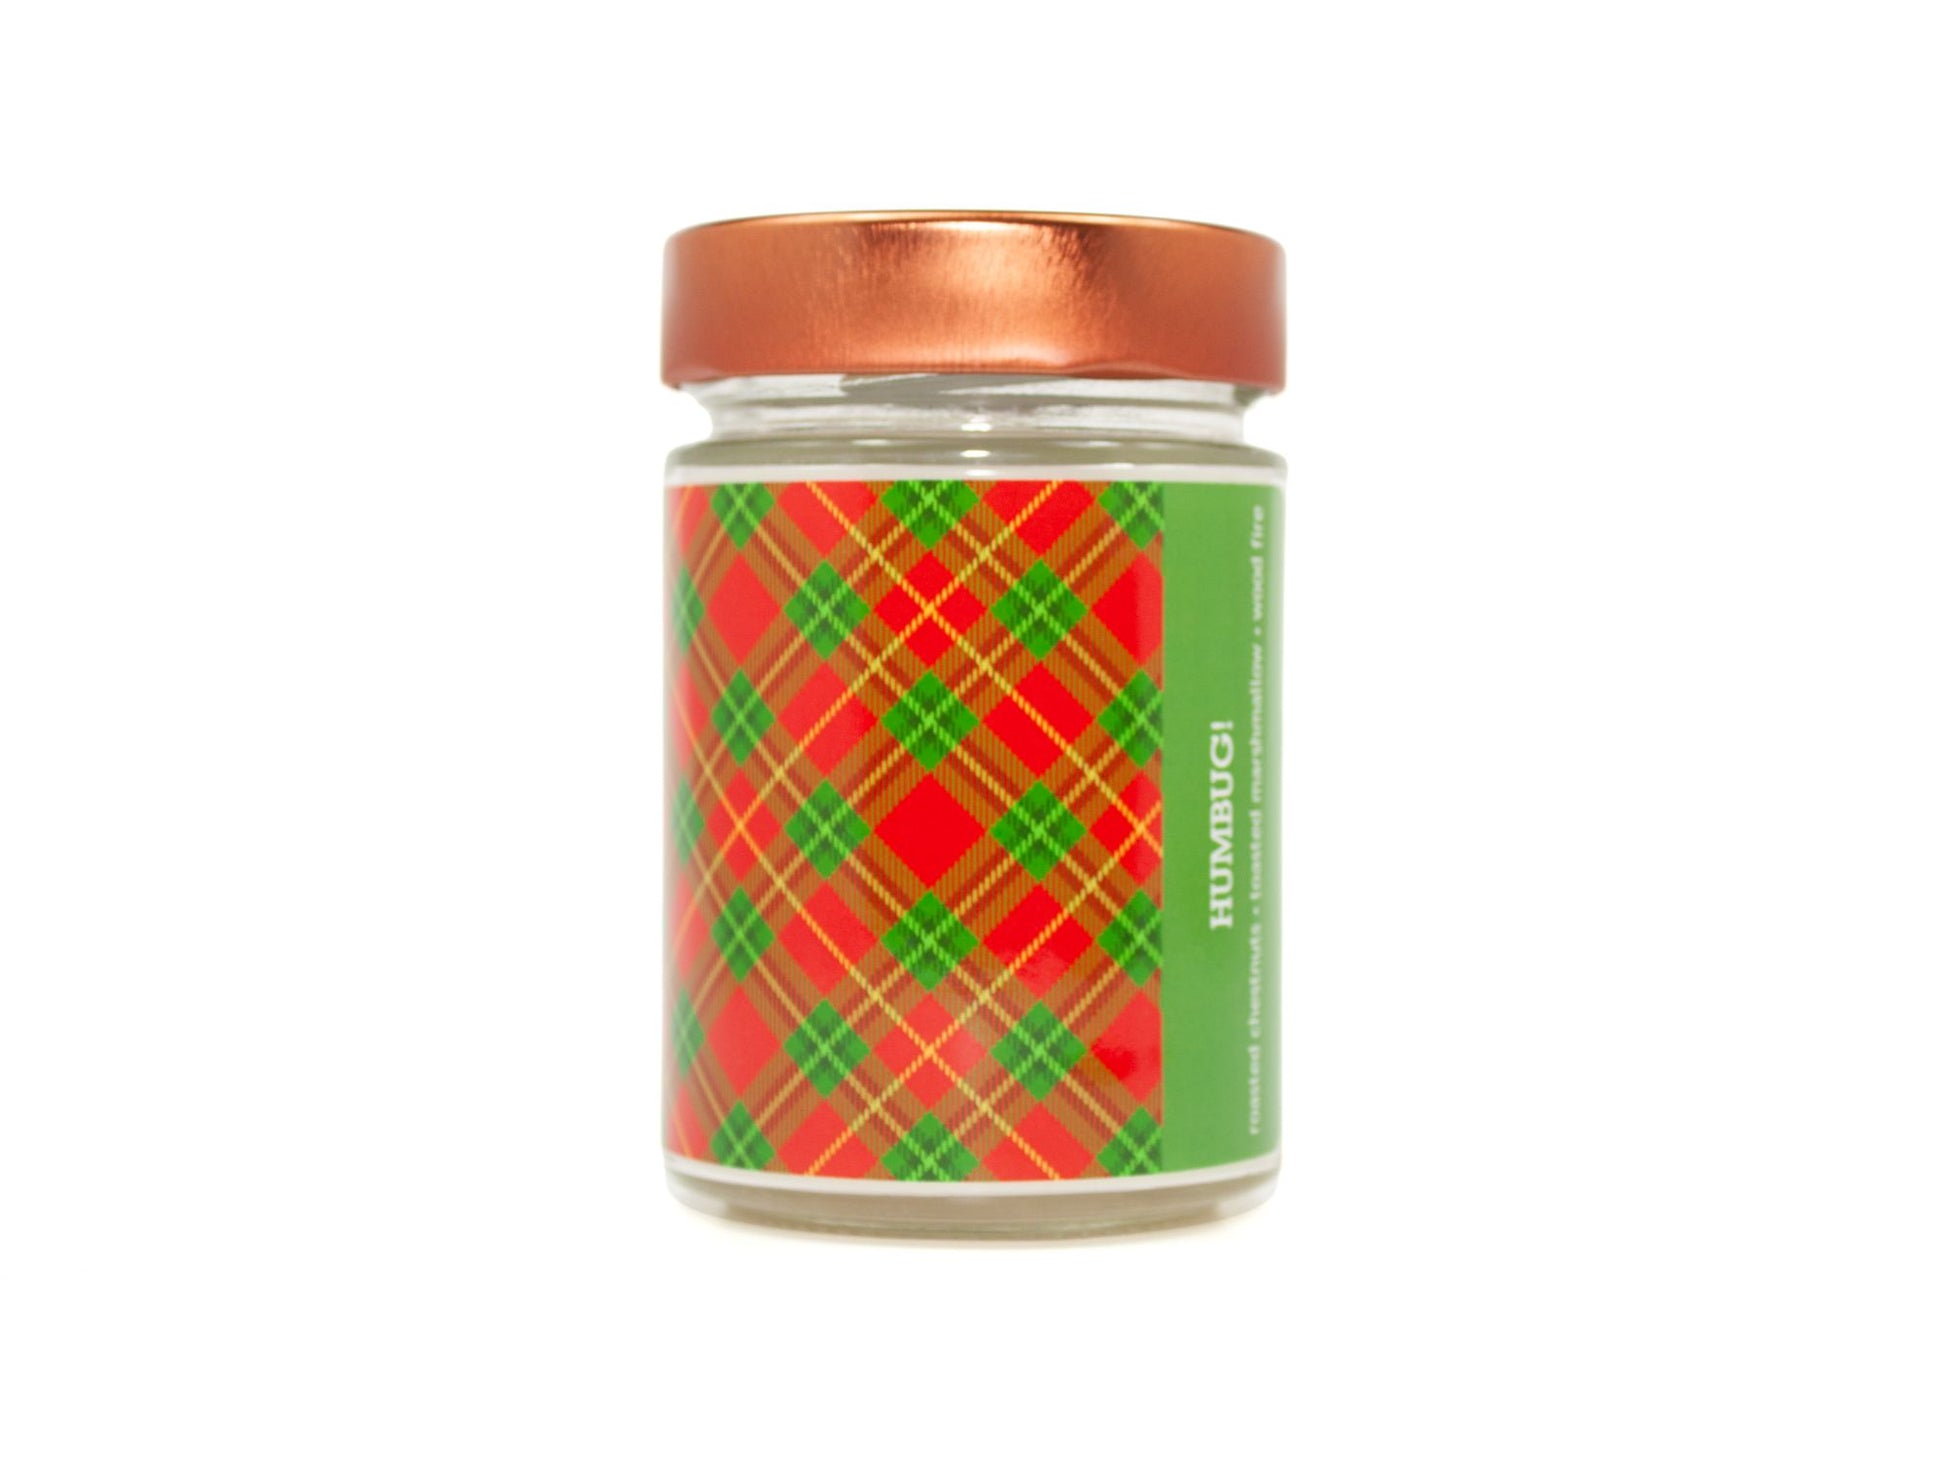 Onset & Rime sweet, smoky scented candle called "Humbug!" in a 10 oz glass jar with copper lid. The label is a red and green plaid pattern. The text on the label is "Humbug! - Roasted Chestnuts, Toasted Marshmallow, Wood Fire".